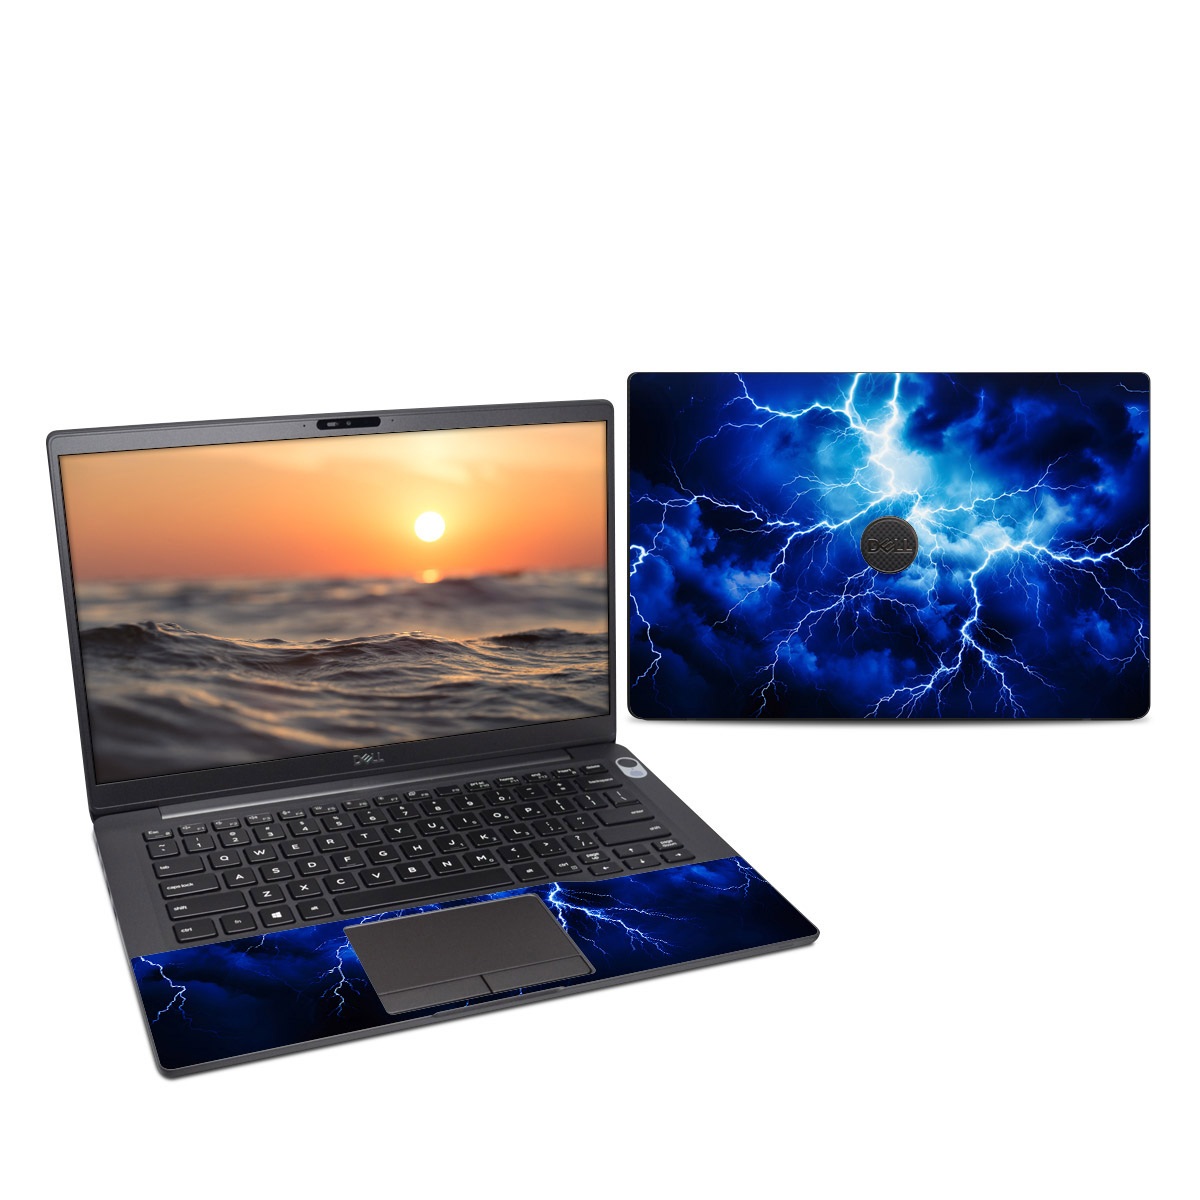 Dell Latitude 7400 Skin design of Thunder, Sky, Atmosphere, Daytime, Cloud, Water, Lightning, Light, Azure, Natural environment, with black, blue colors